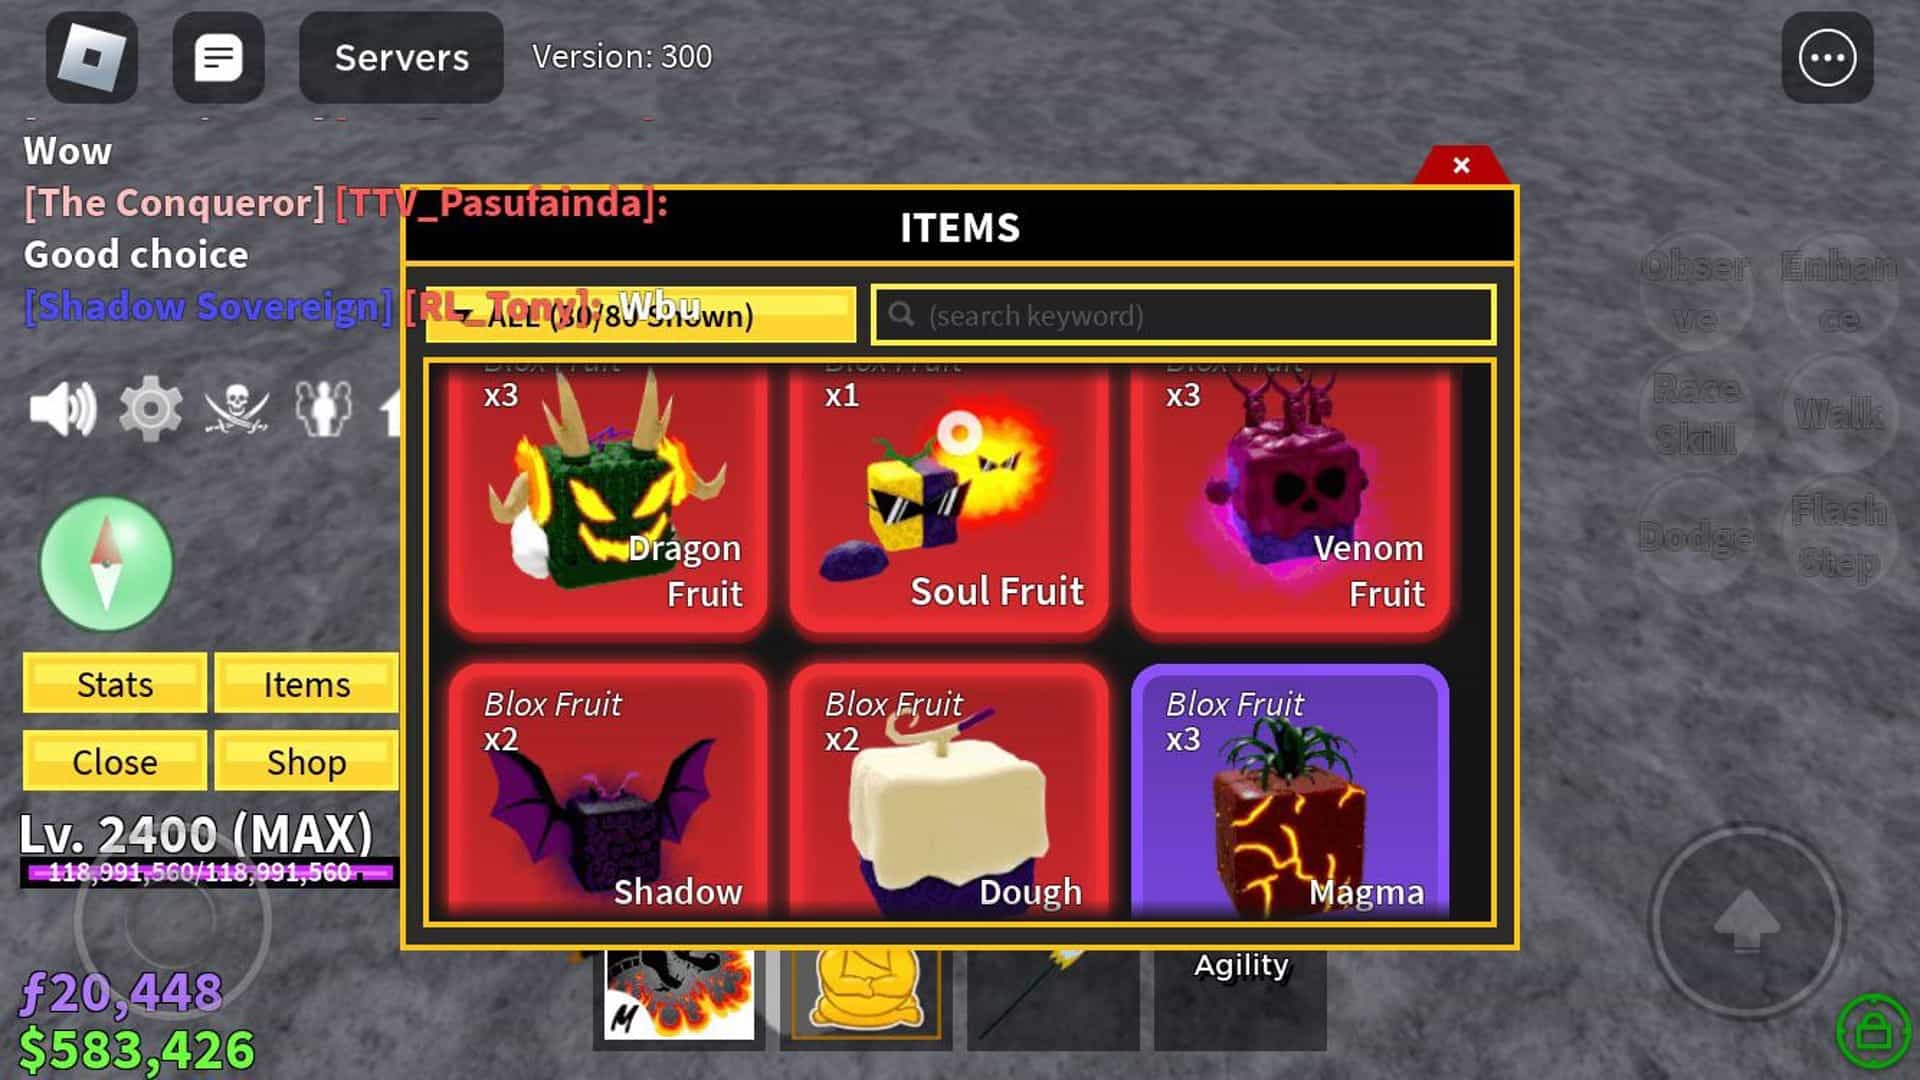 Screenshot of Items Page in Blox Fruits